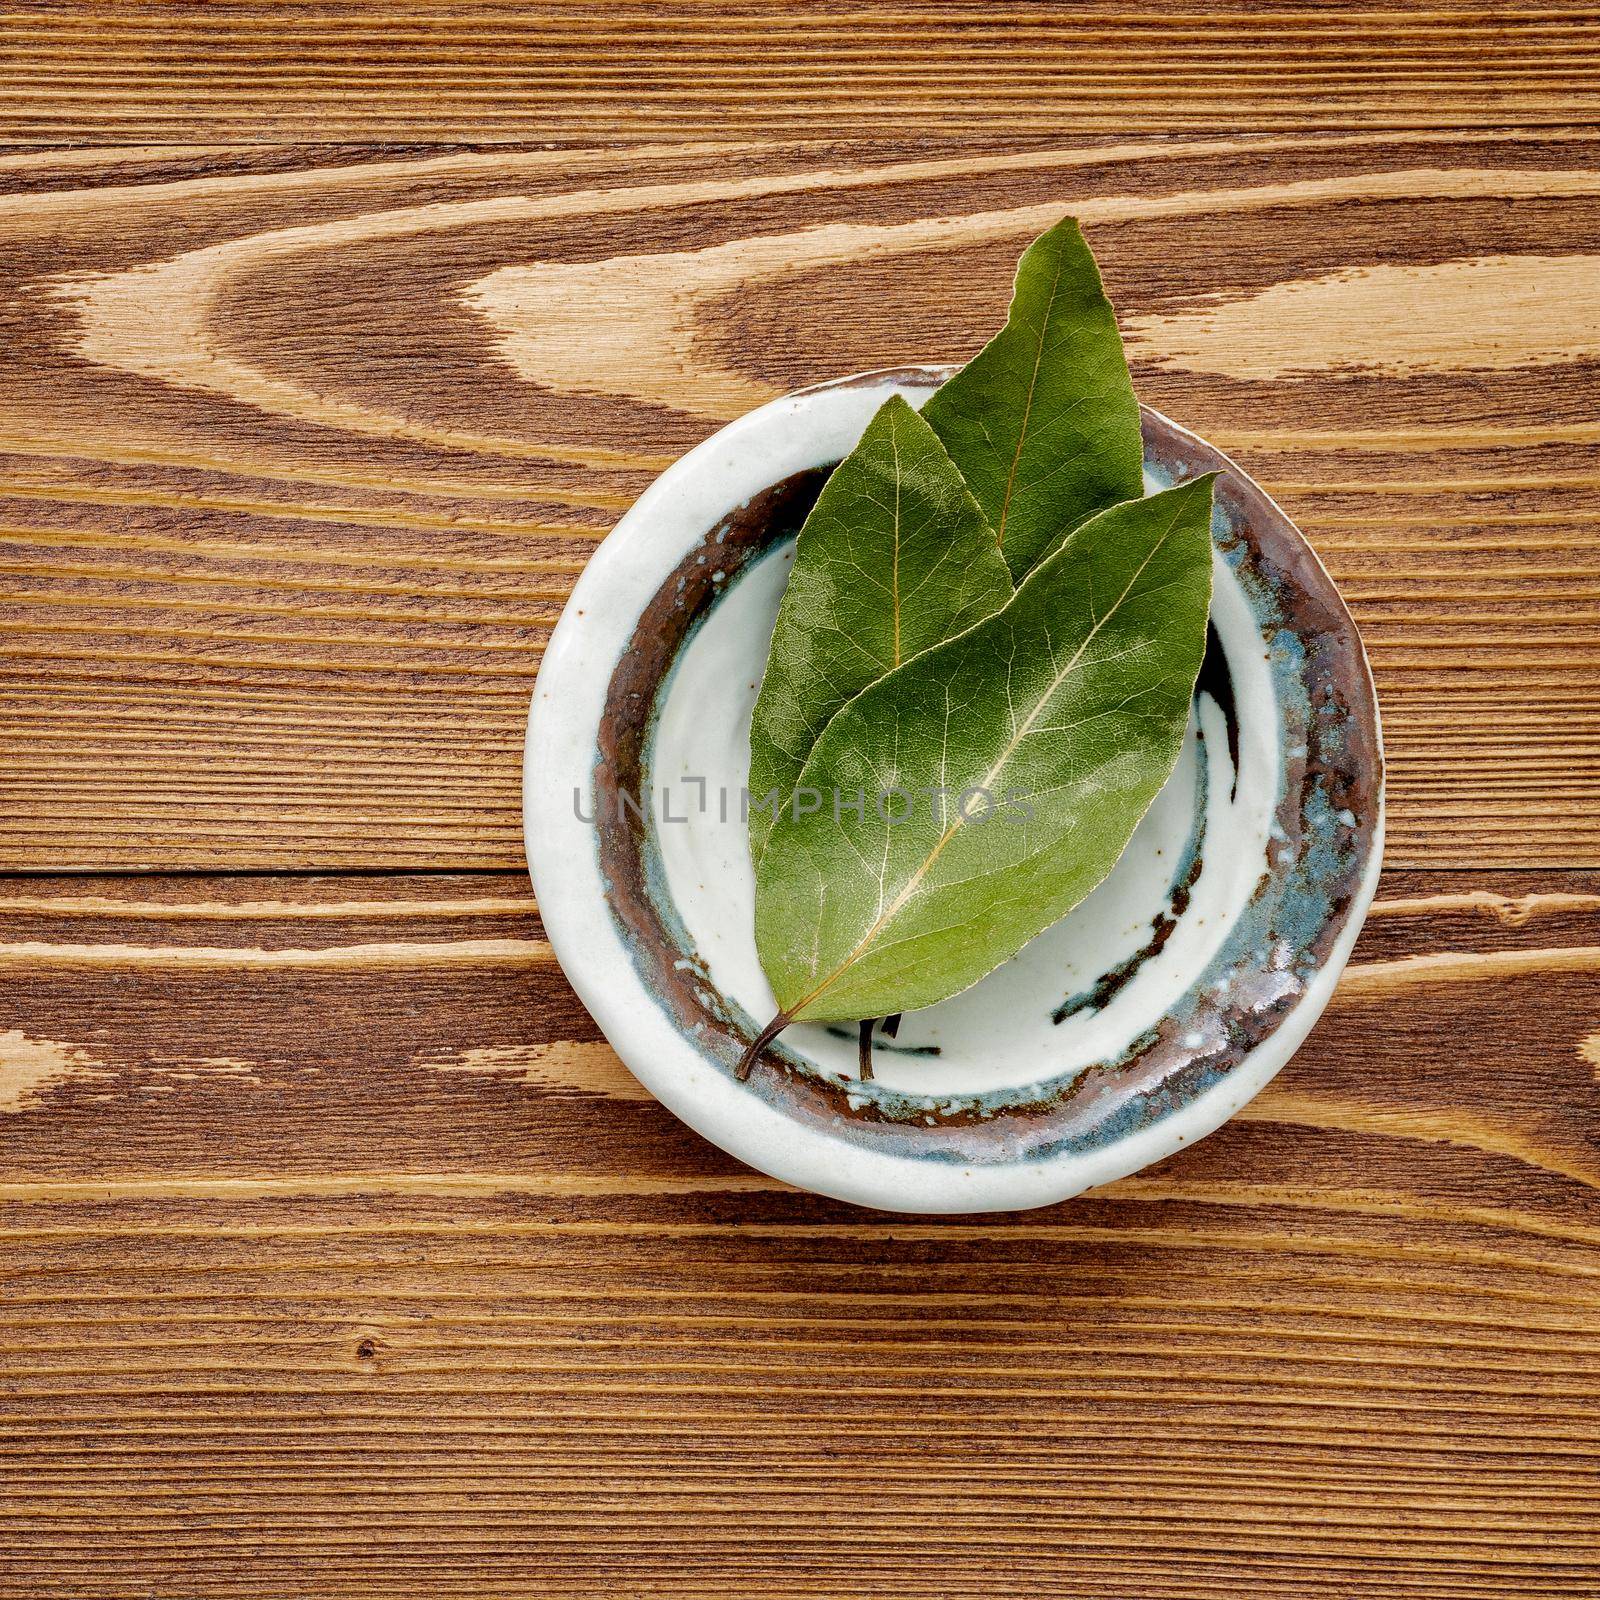 The bay leaves in ceramic bowl on shabby wooden background with copy space . by kerdkanno